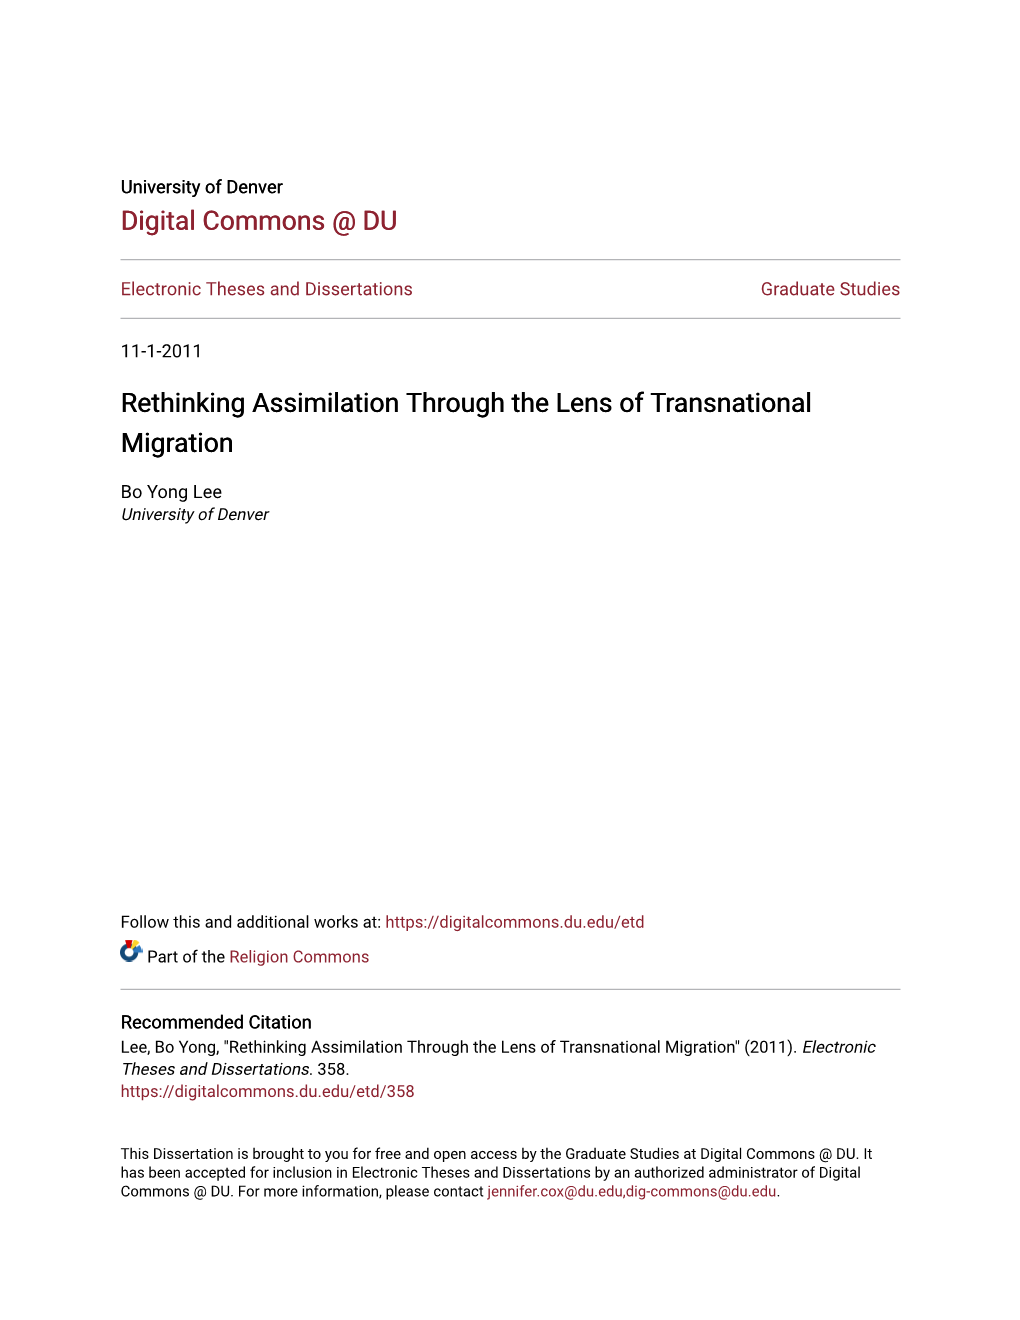 Rethinking Assimilation Through the Lens of Transnational Migration